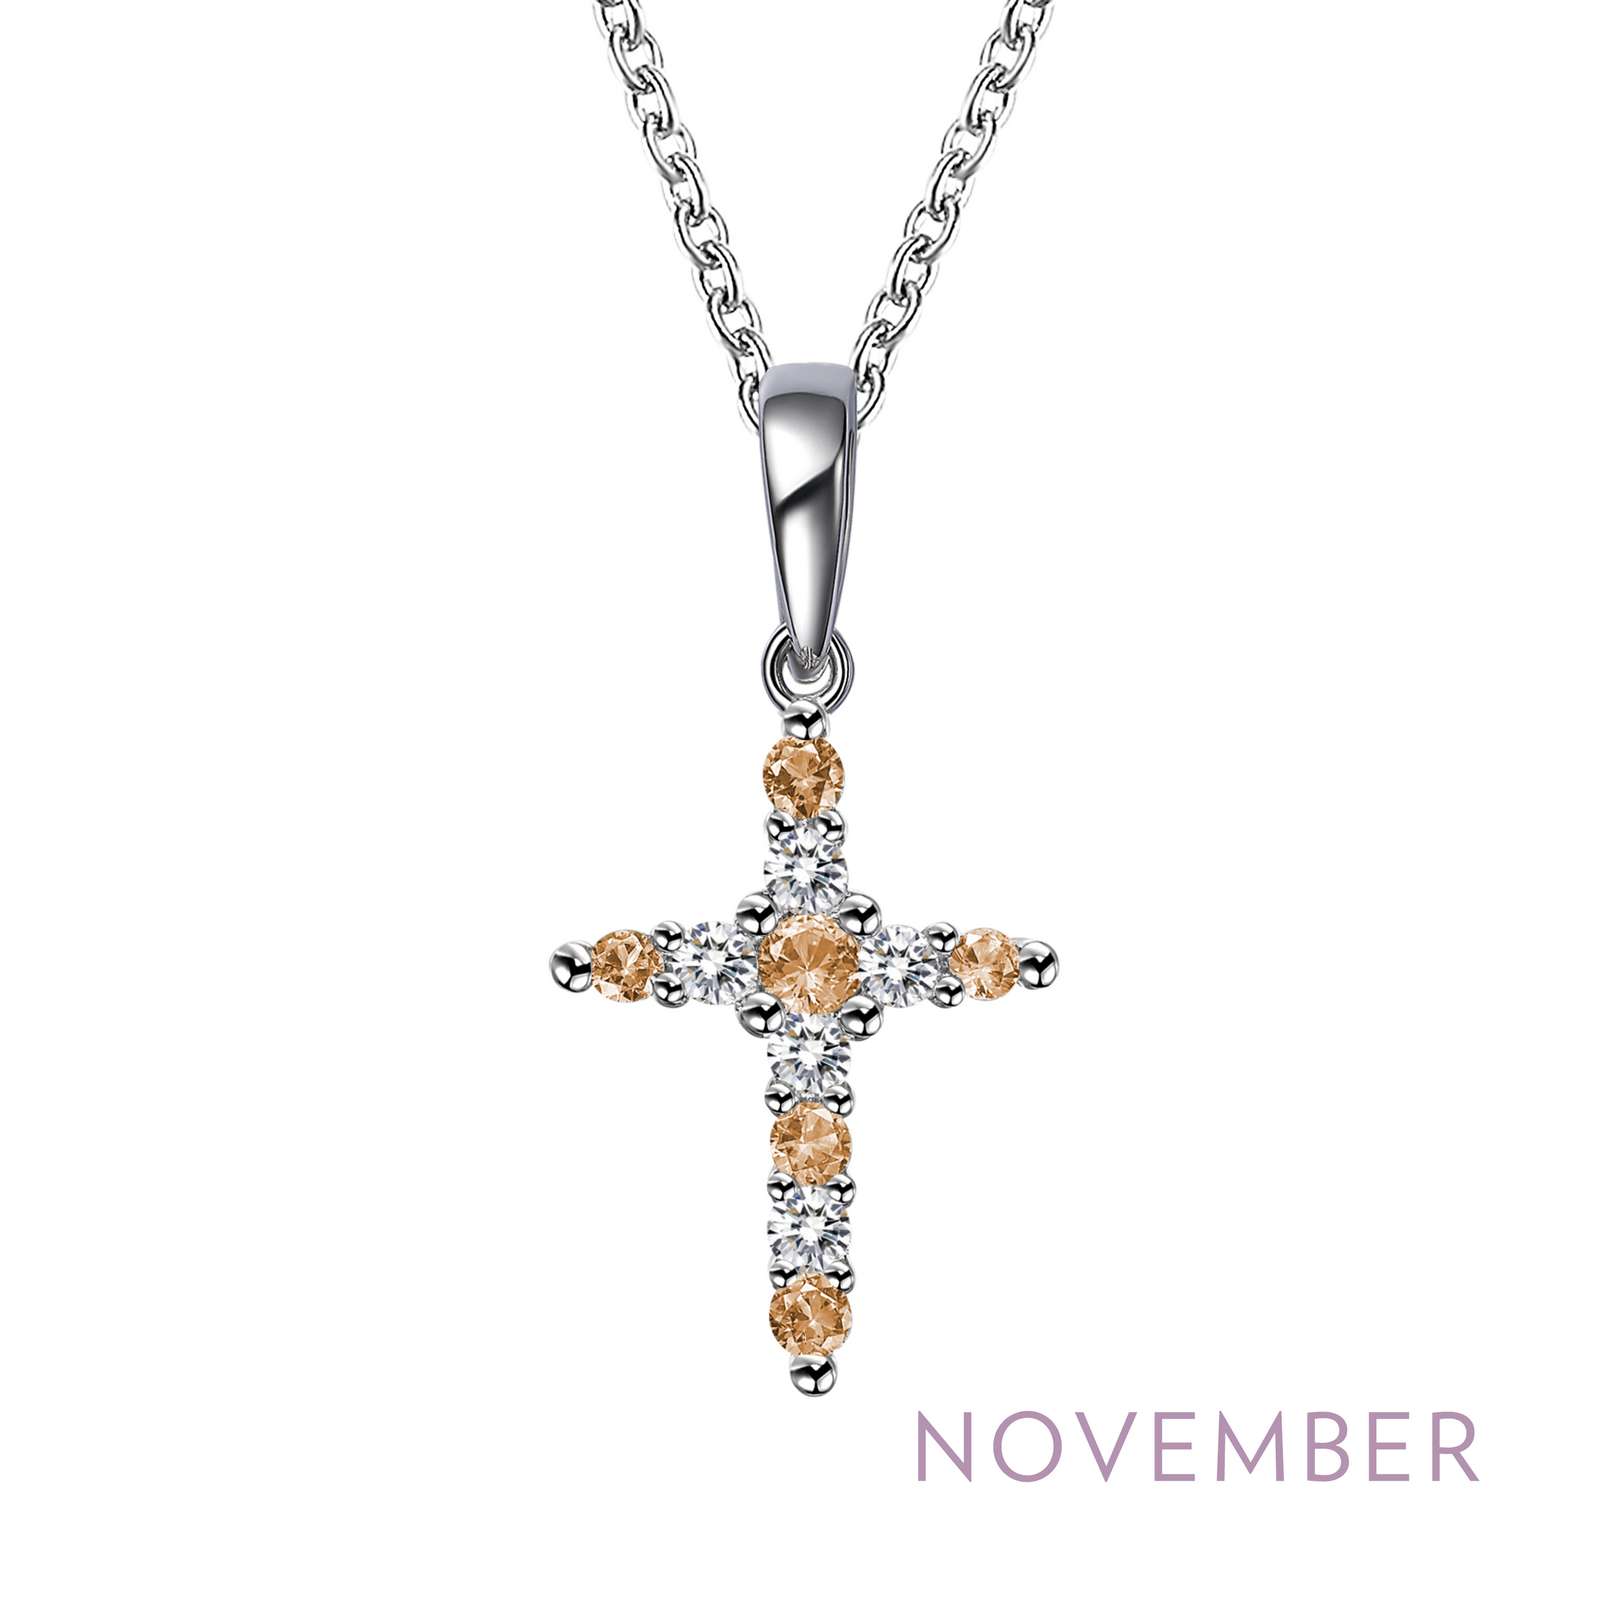 November Birthstone Necklace Griner Jewelry Co. Moultrie, GA